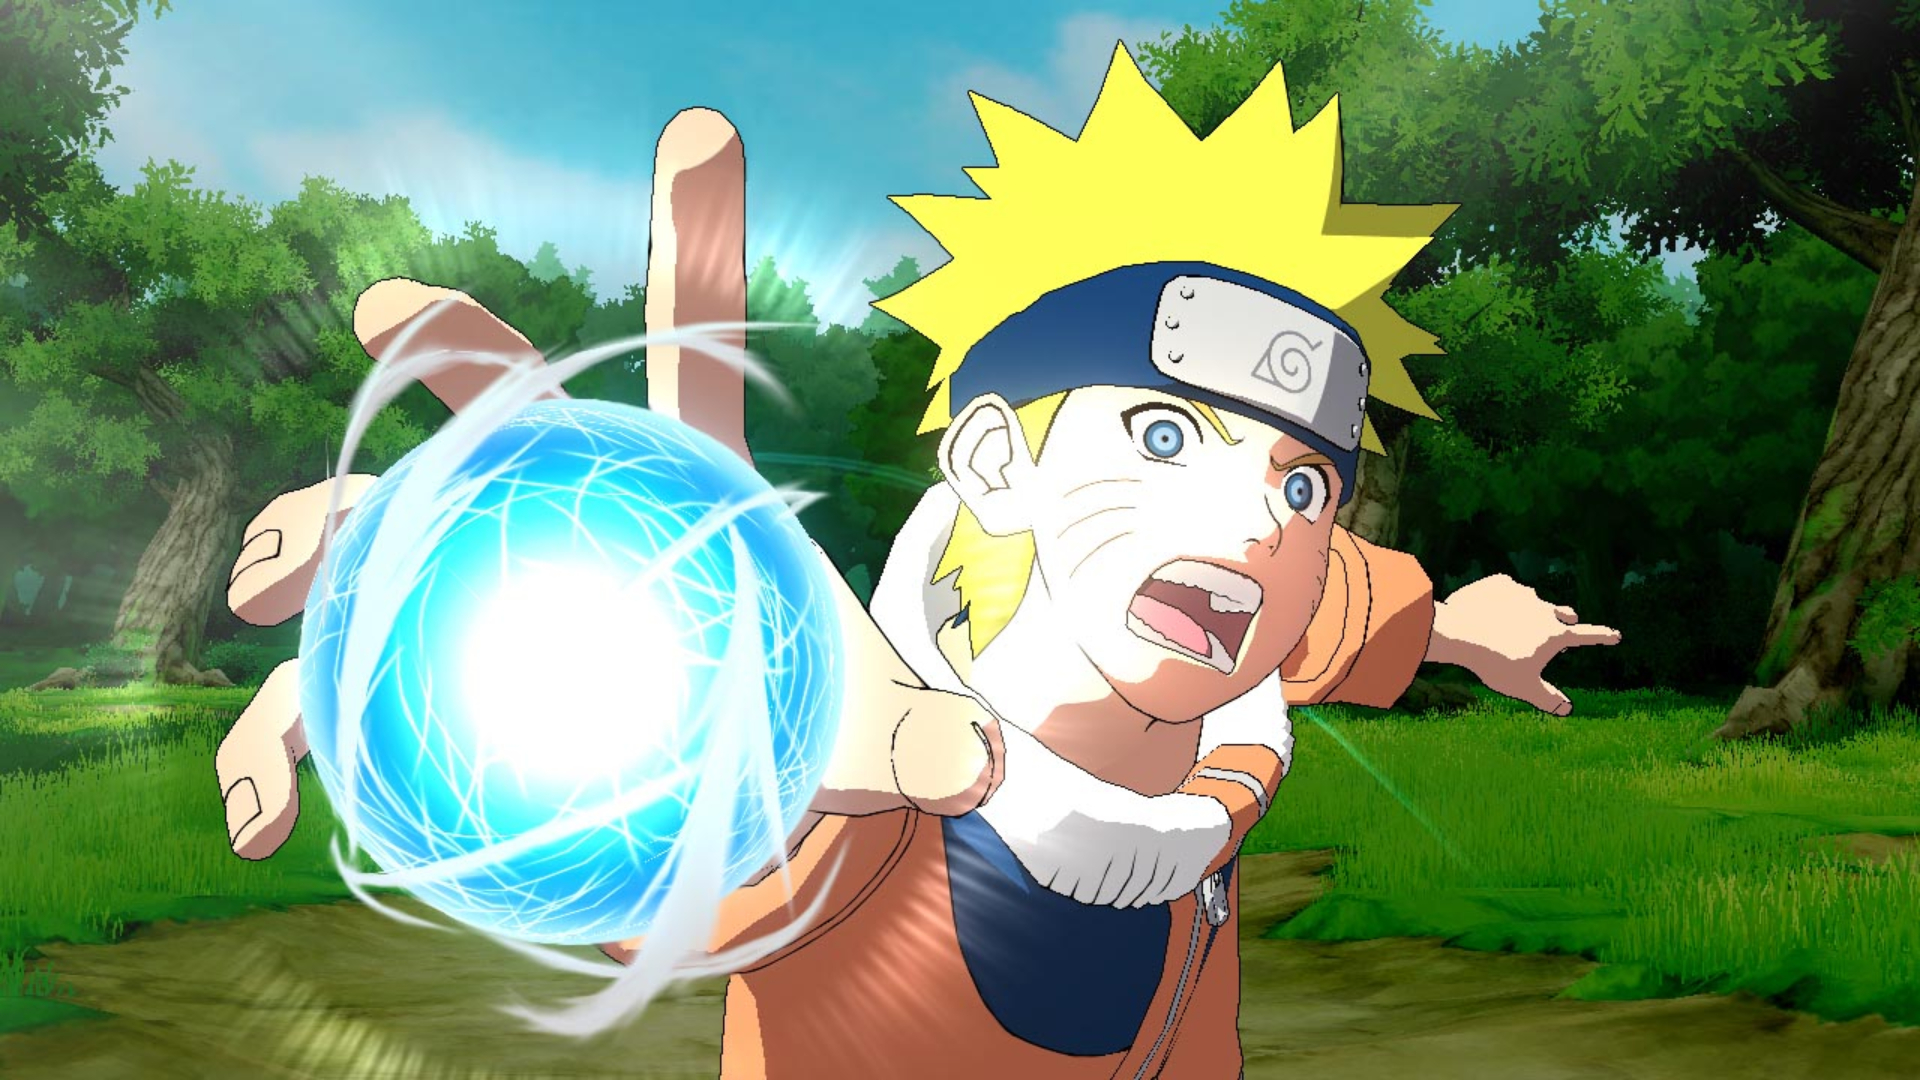 Best anime games: Naruto: Ultimate Ninja Storm. Image shows Naruto getting ready to fire a beam.